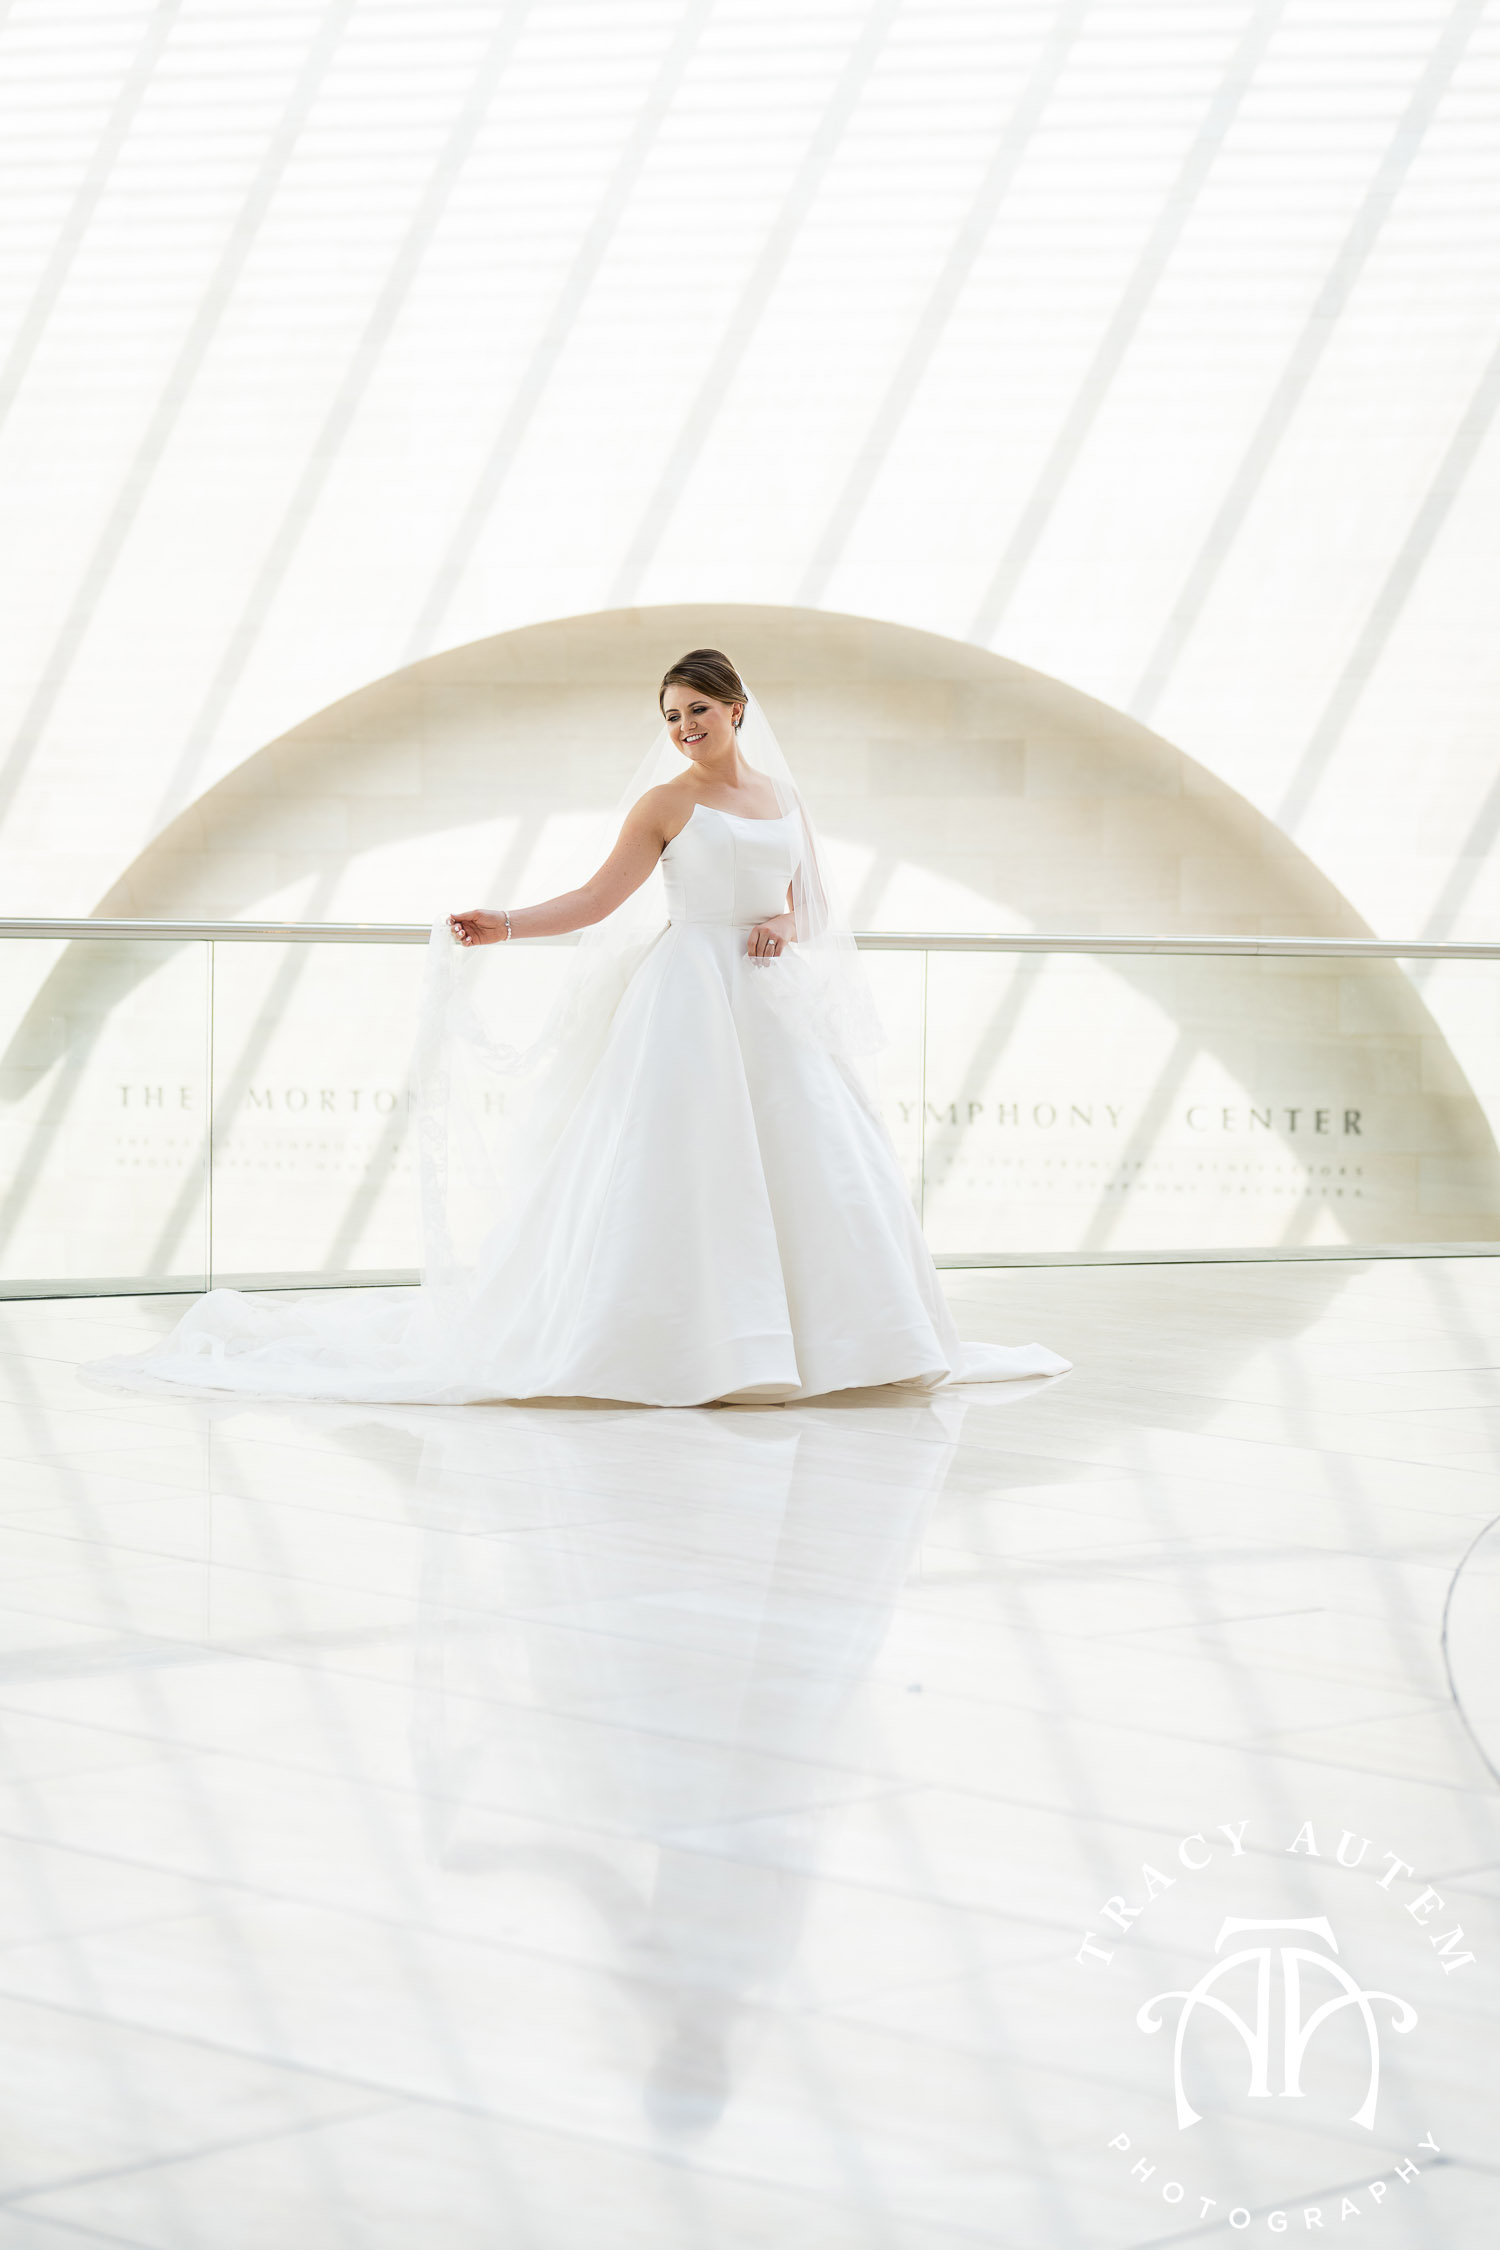 Timeless classic bridal portrait at the Meyerson Symphony Center in Dallas by Tracy Autem Photography